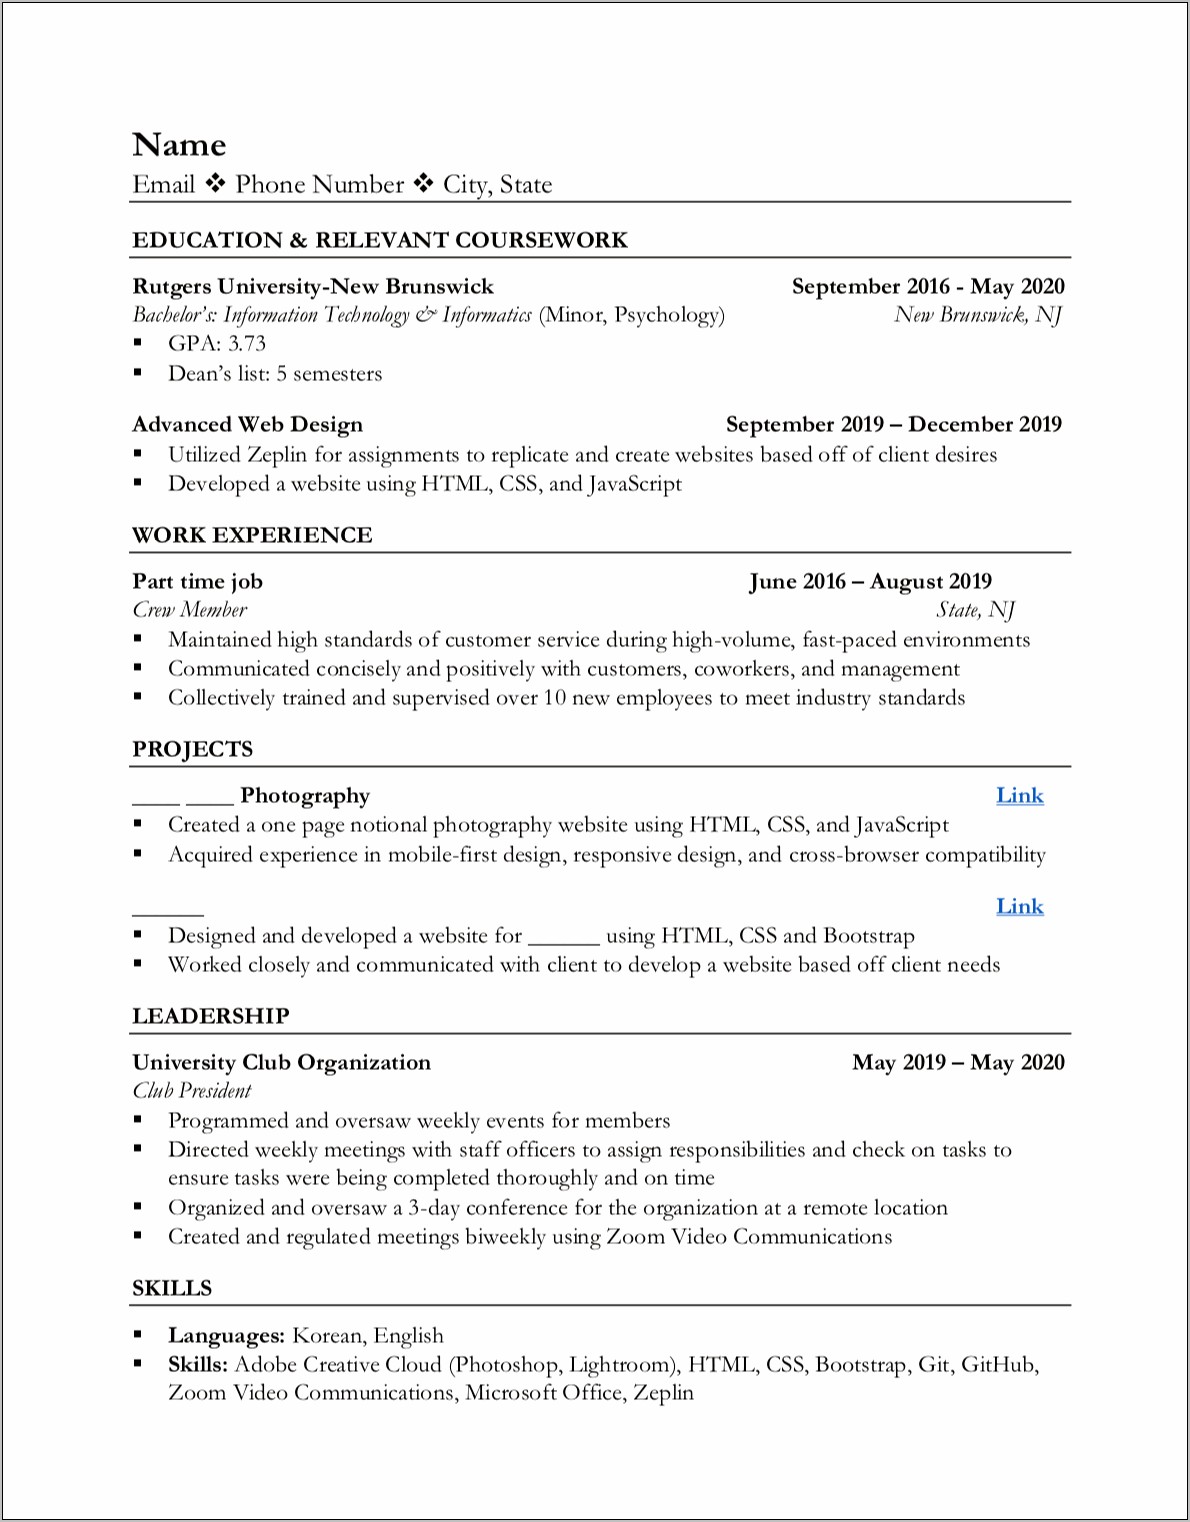 Chrome Extension To Learn Work History For Resumes